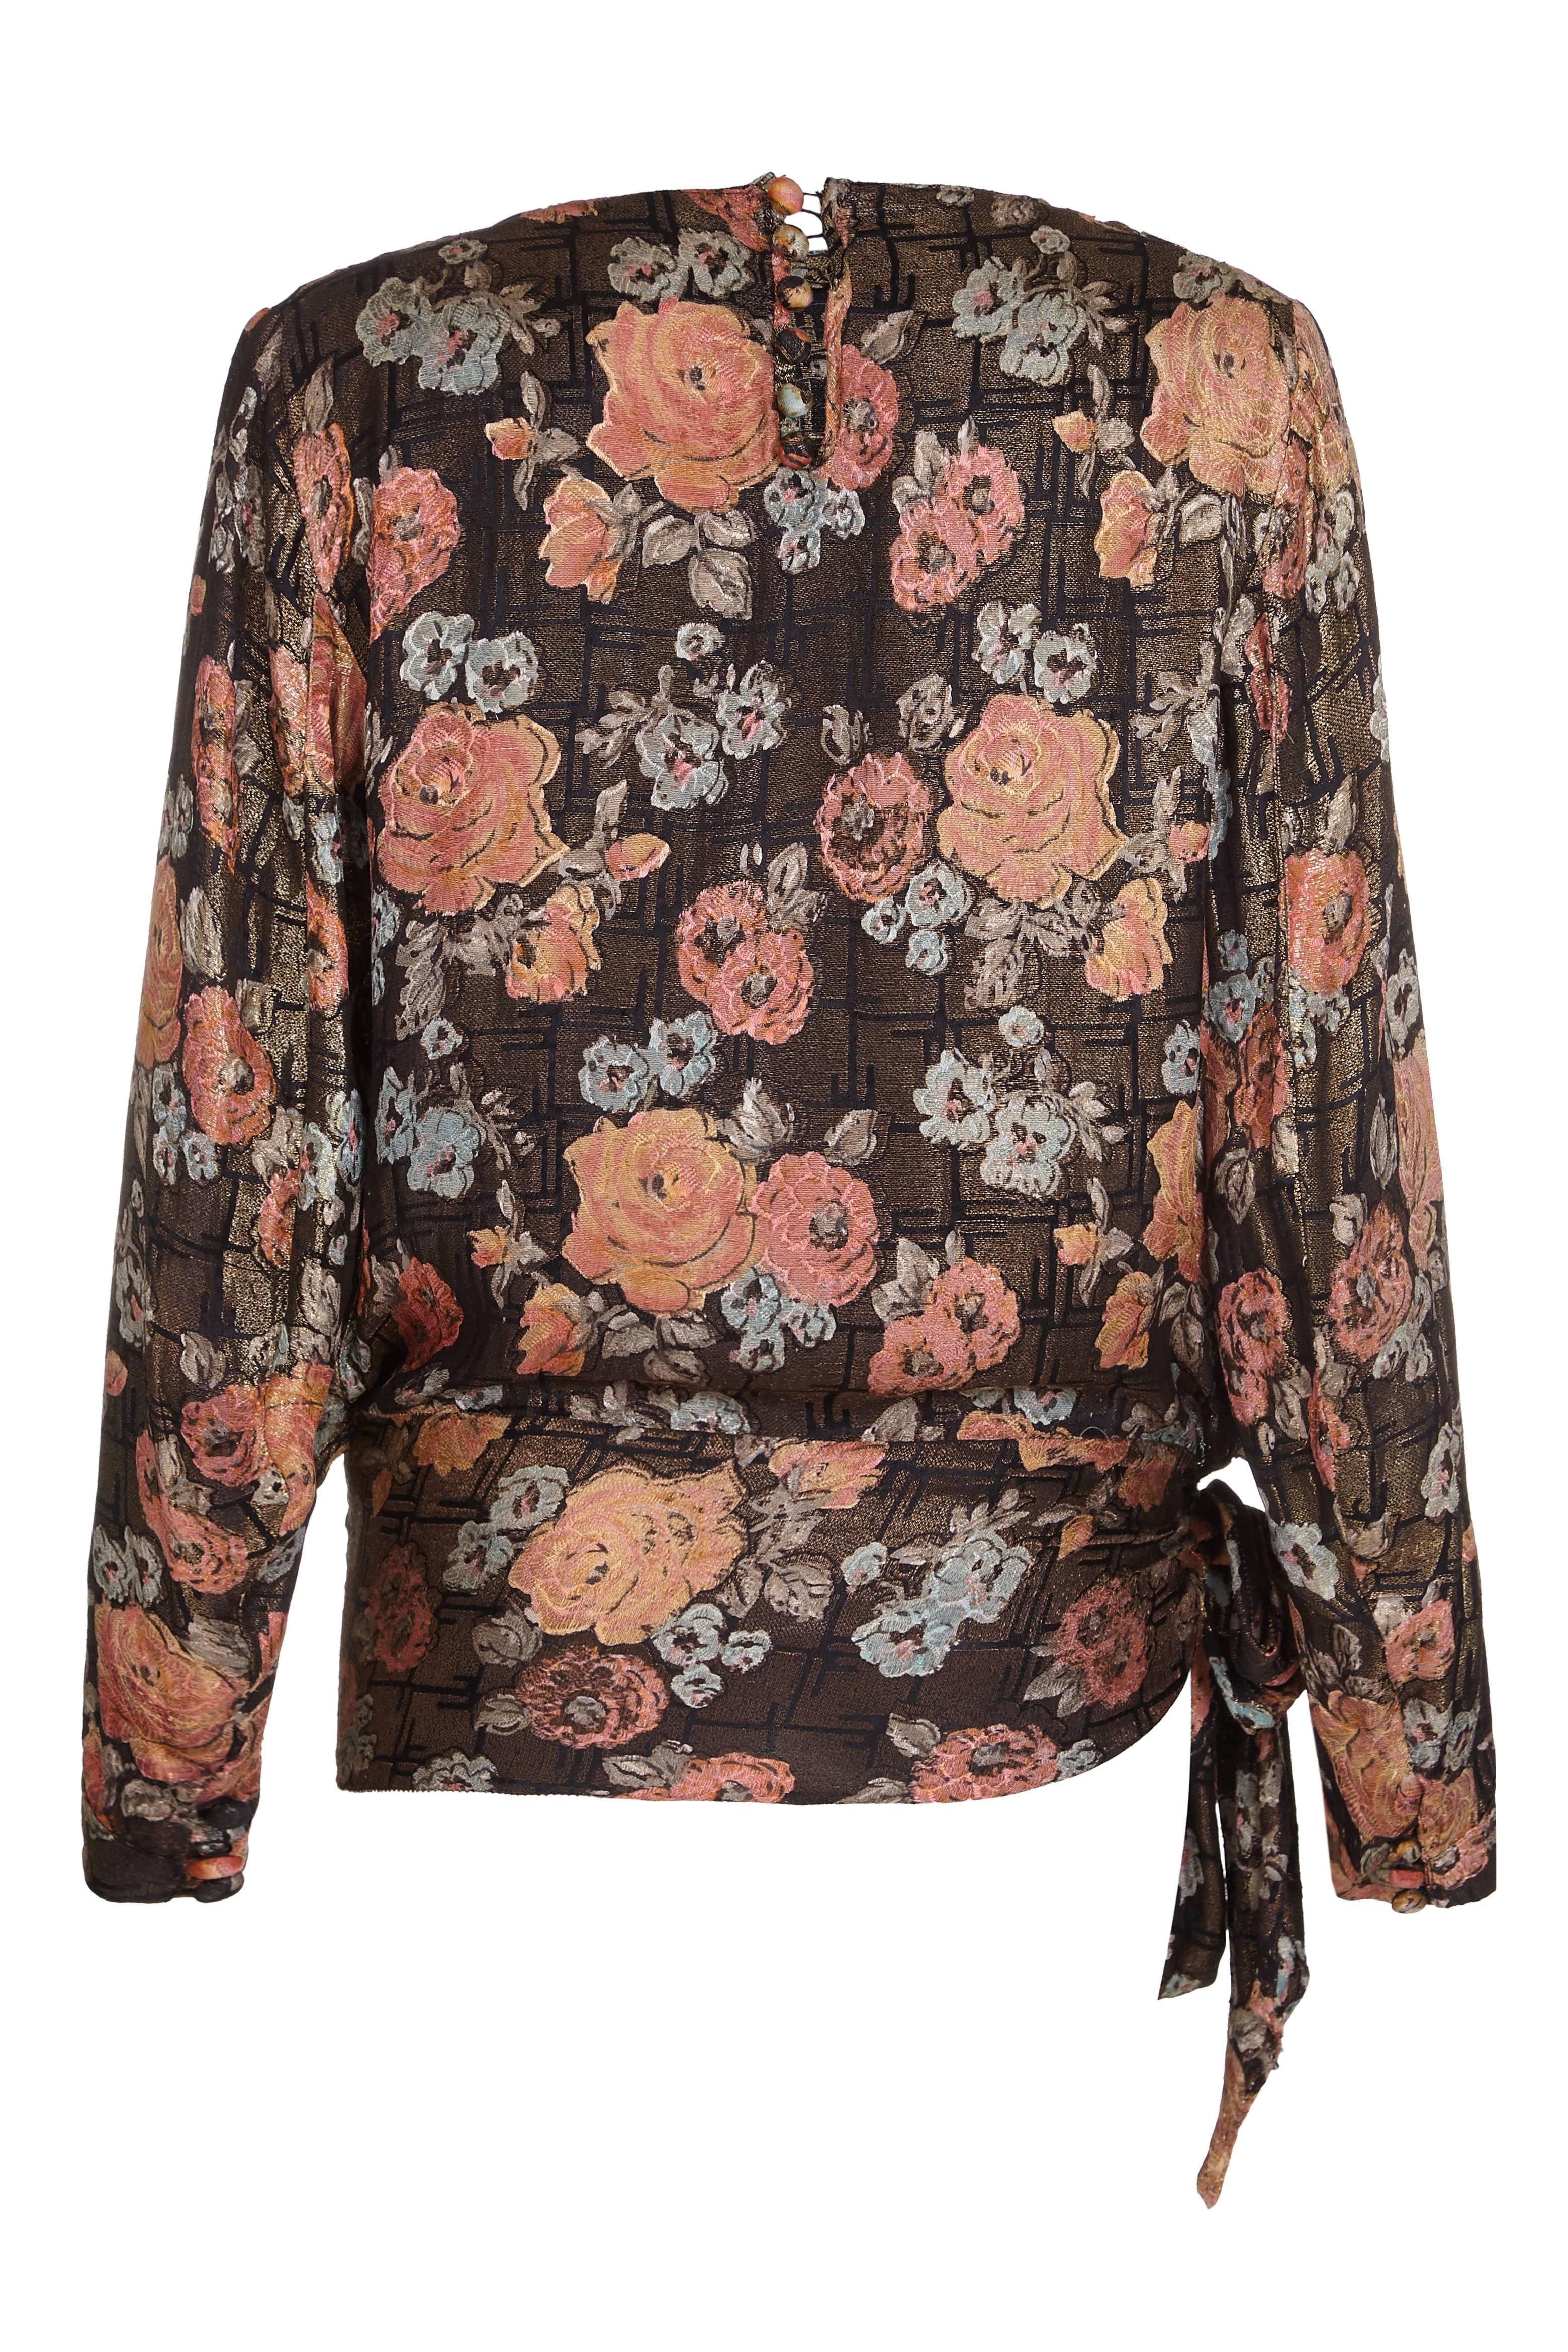 This desirable 1920s gold lamé blouse with a pretty rose print in soft peach, pale blue and grey tones over an abstract black and gold deco background is in excellent vintage condition although the designer is unknown. It features a lengthly sash